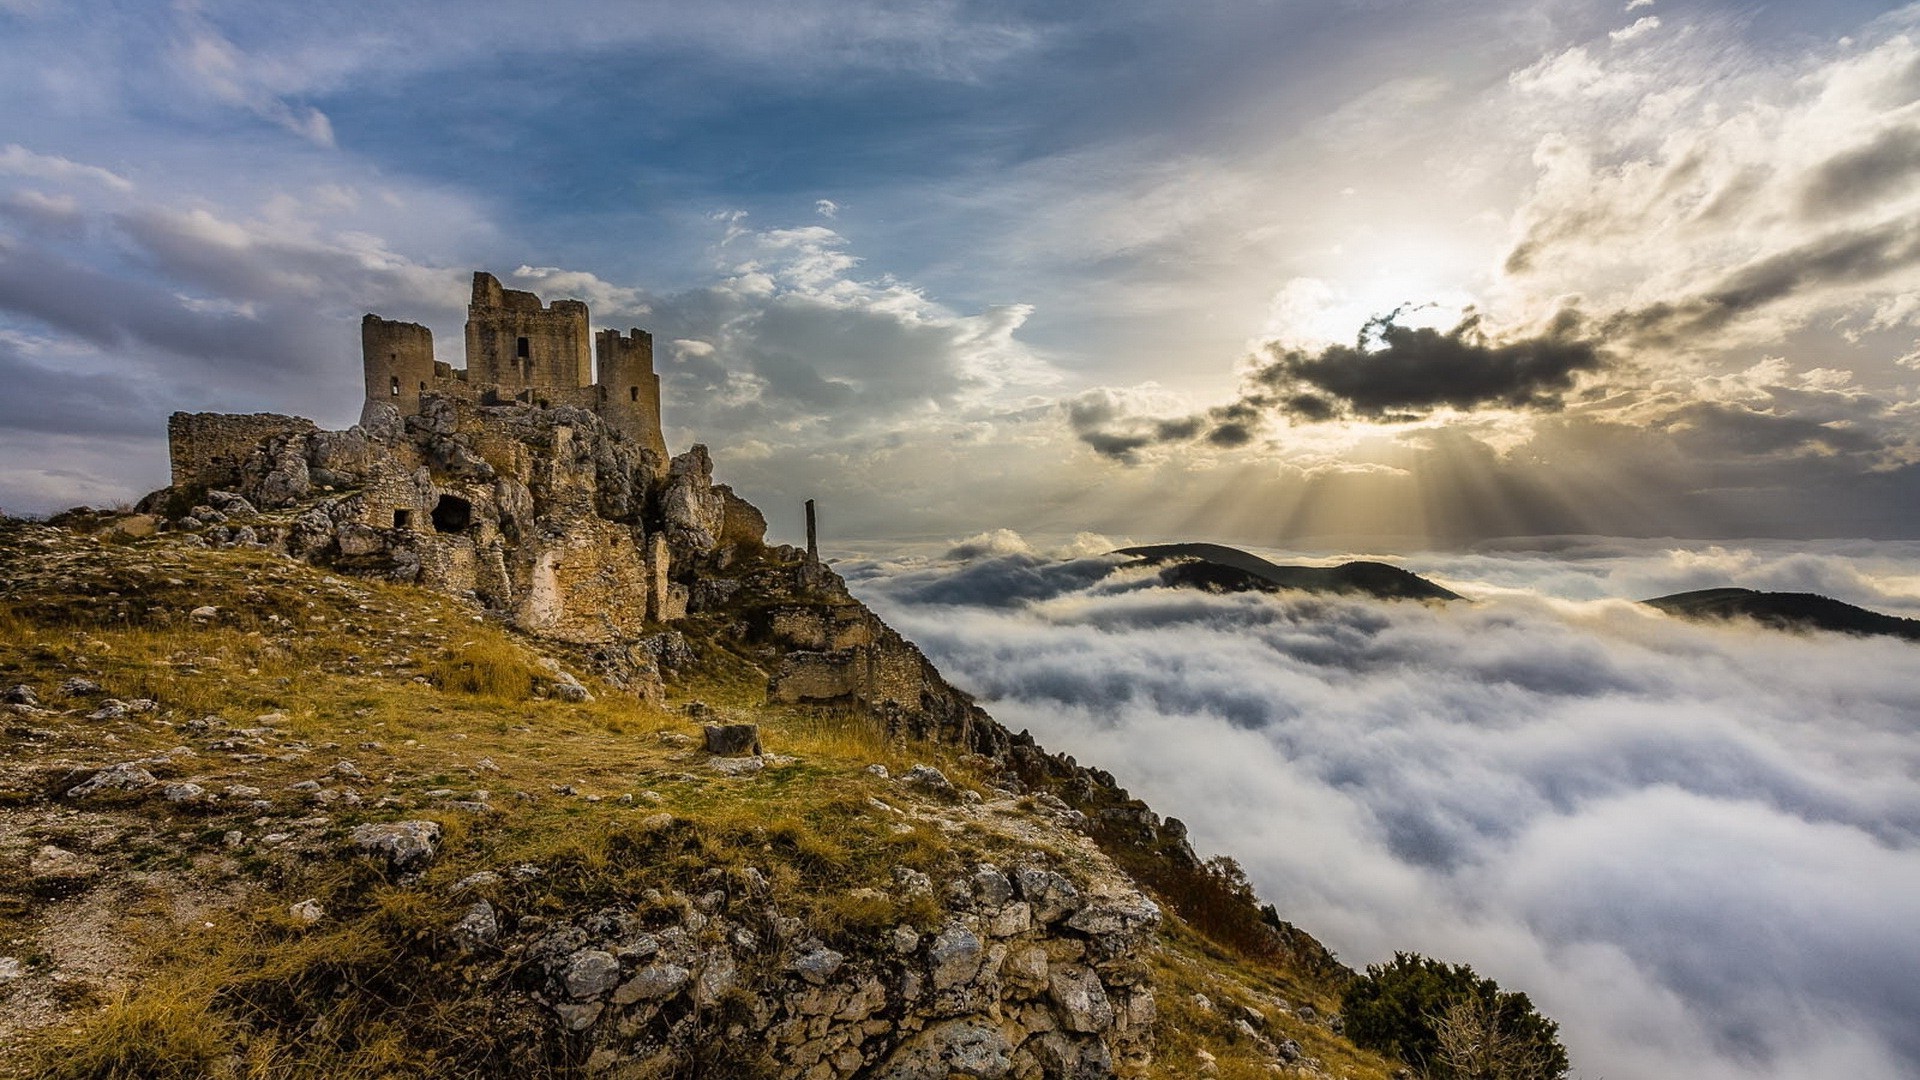 architecture, Castle, Ancient, Nature, Trees, Landscape, Clouds, Italy, Ruin, Hills, Rock, Stones, Sun Rays Wallpaper